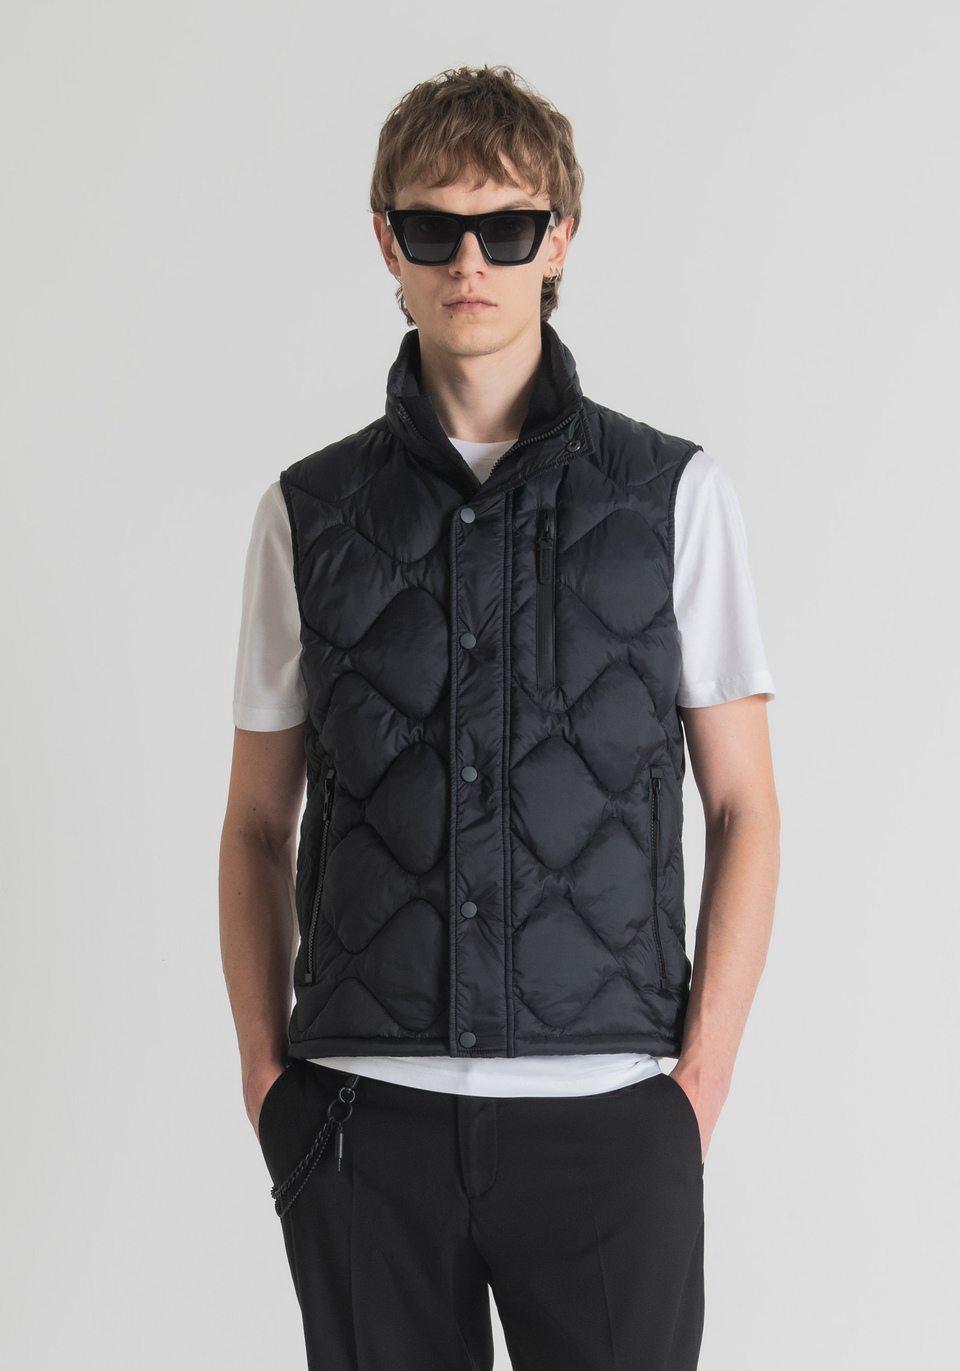 SLIM FIT GILET IN QUILTED TECHNICAL FABRIC - Antony Morato Online Shop